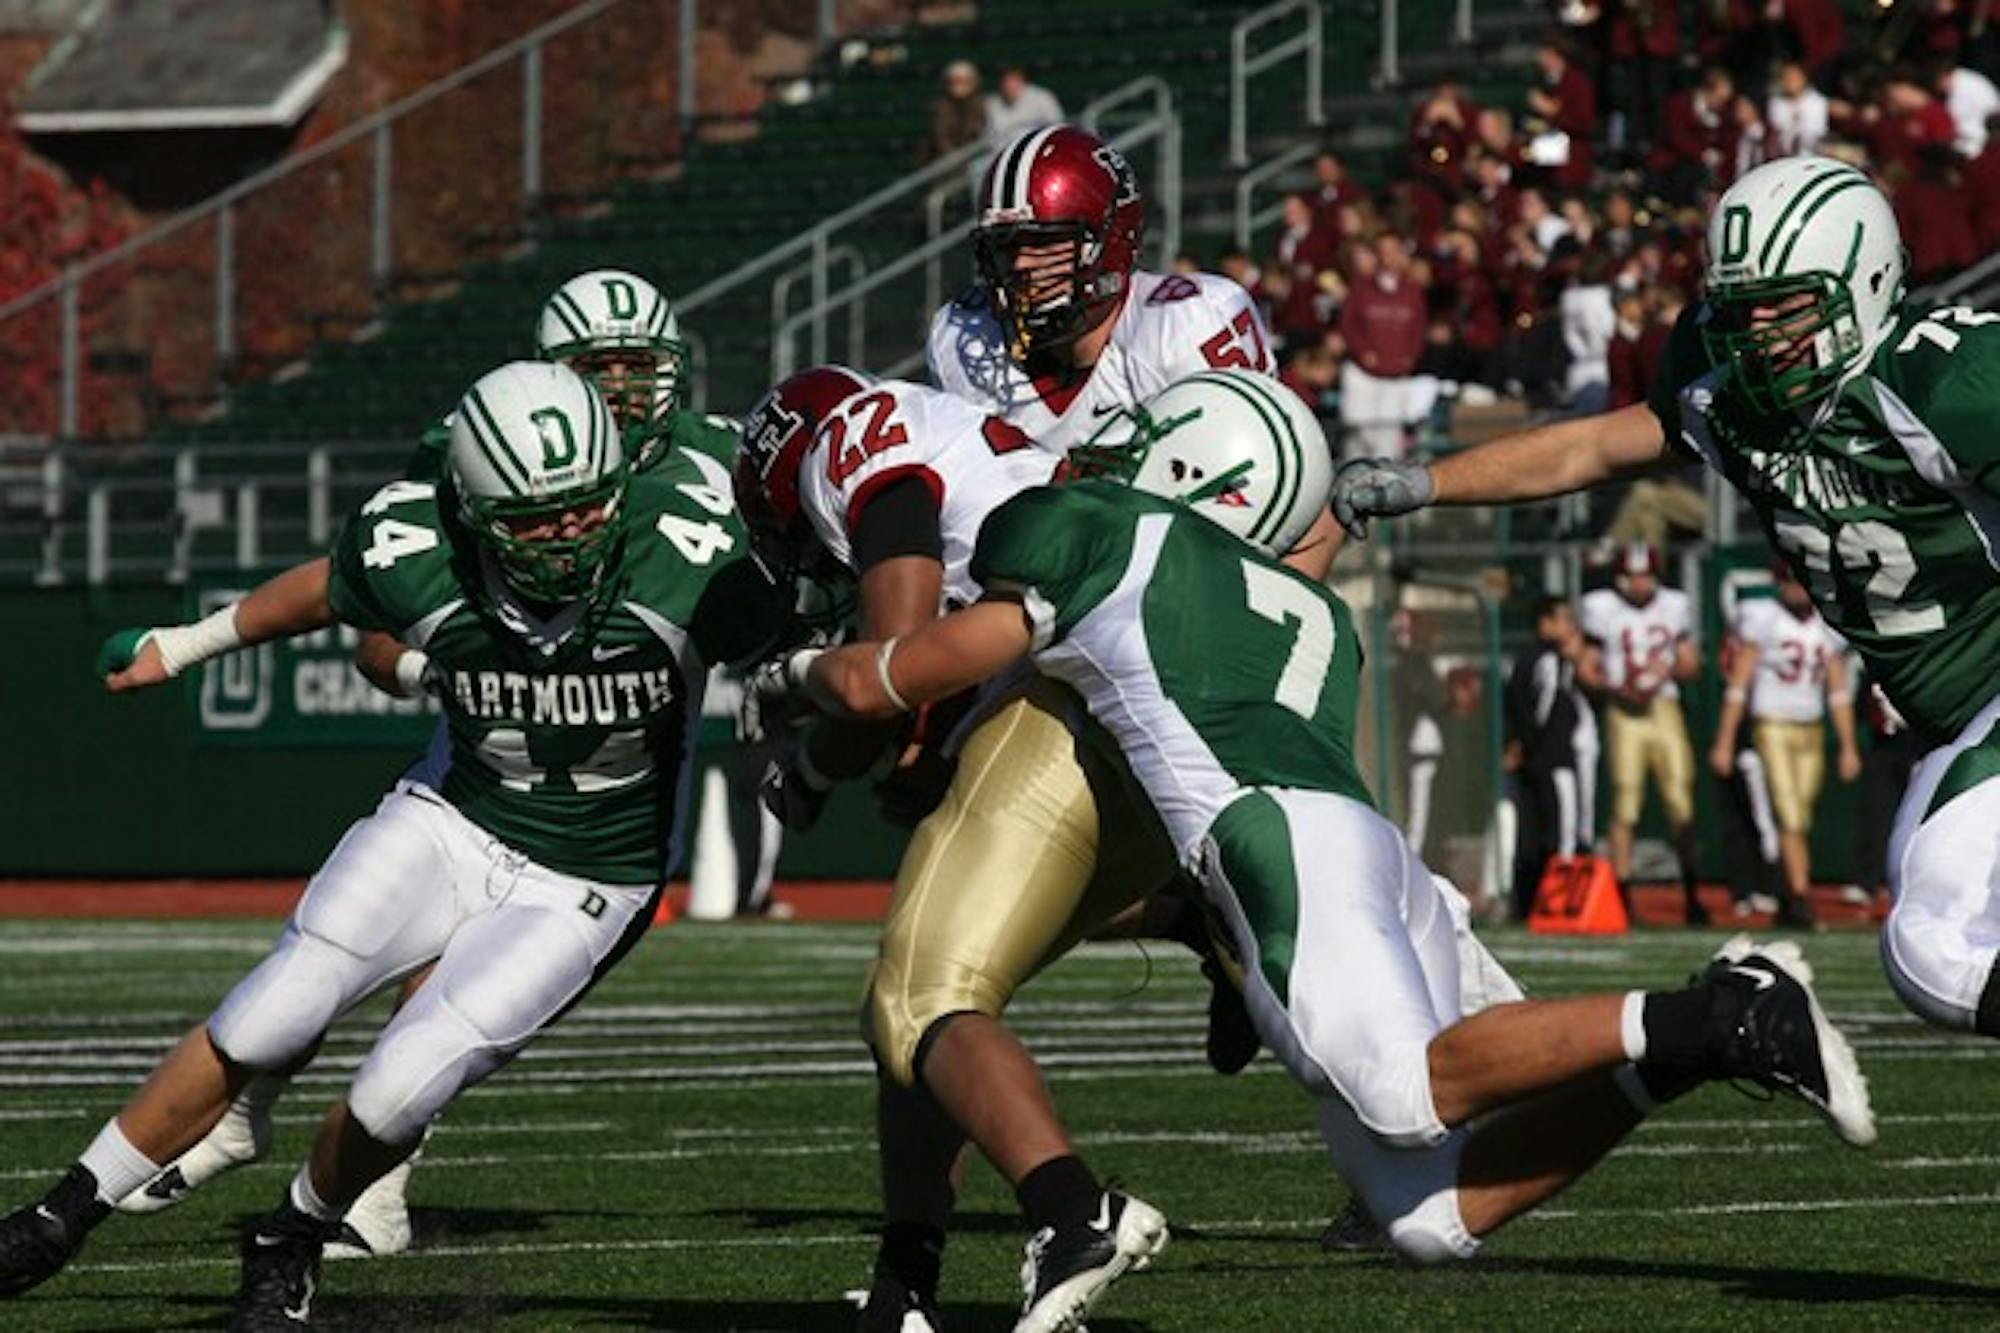 While Dartmouth's defense limited Crimson QB Chris Pizzotti to 98 yards passing, the Big Green yielded 368 rushing yards to the Harvard running attack.